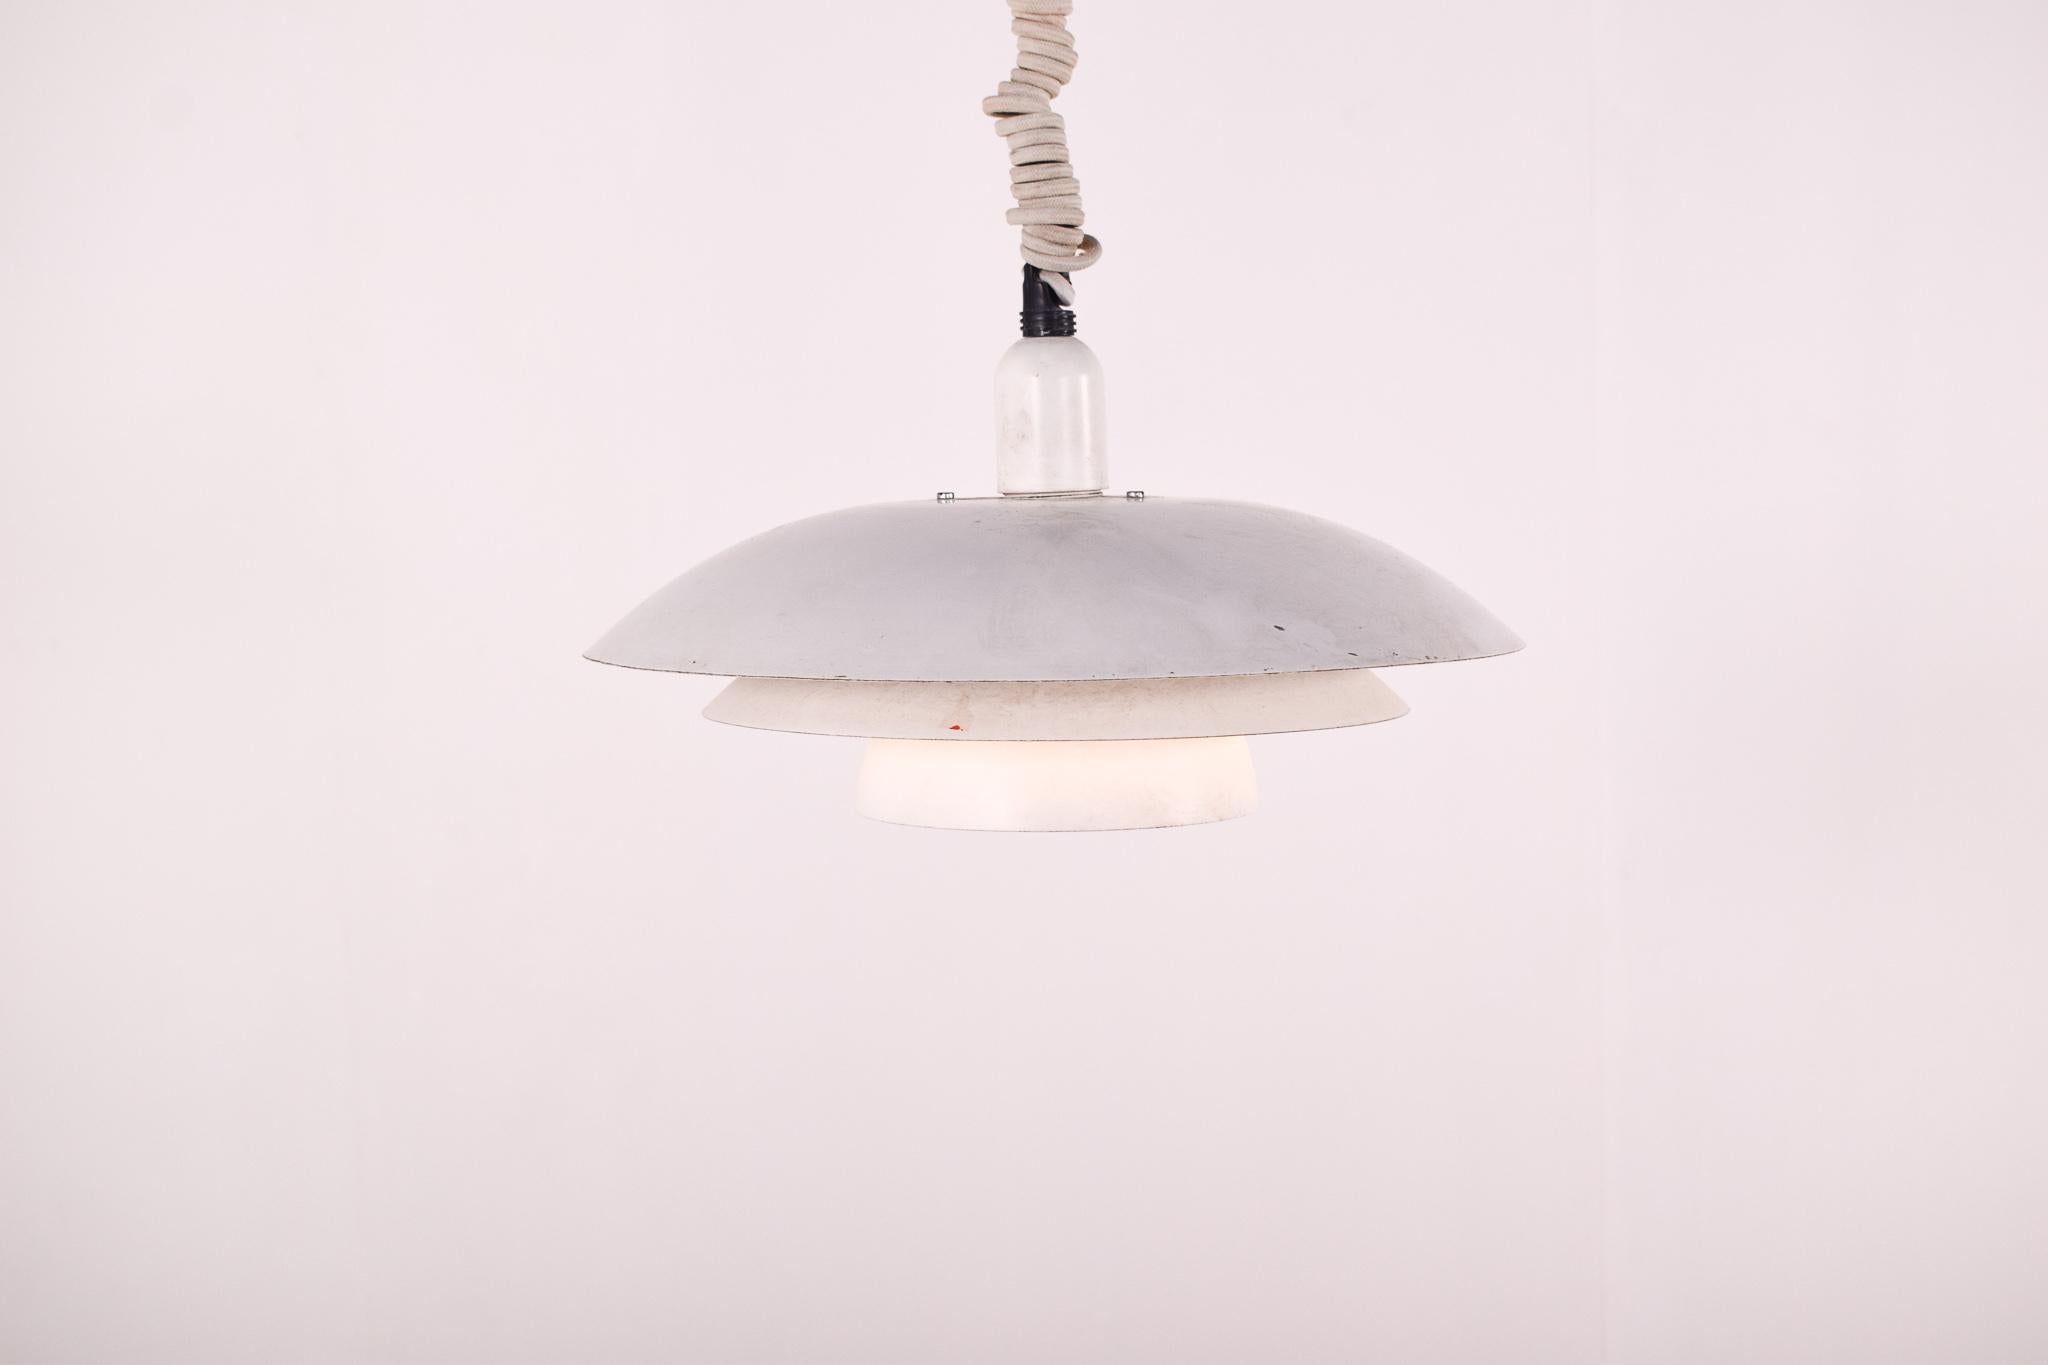 Designed by Poul Henningsen for Louis Poulsen, PH 4/3 Pendant is based on the principle of a reflective system, which directs the majority of the light downwards. The shades are made of metal and painted white to ensure uniform, comfortable light